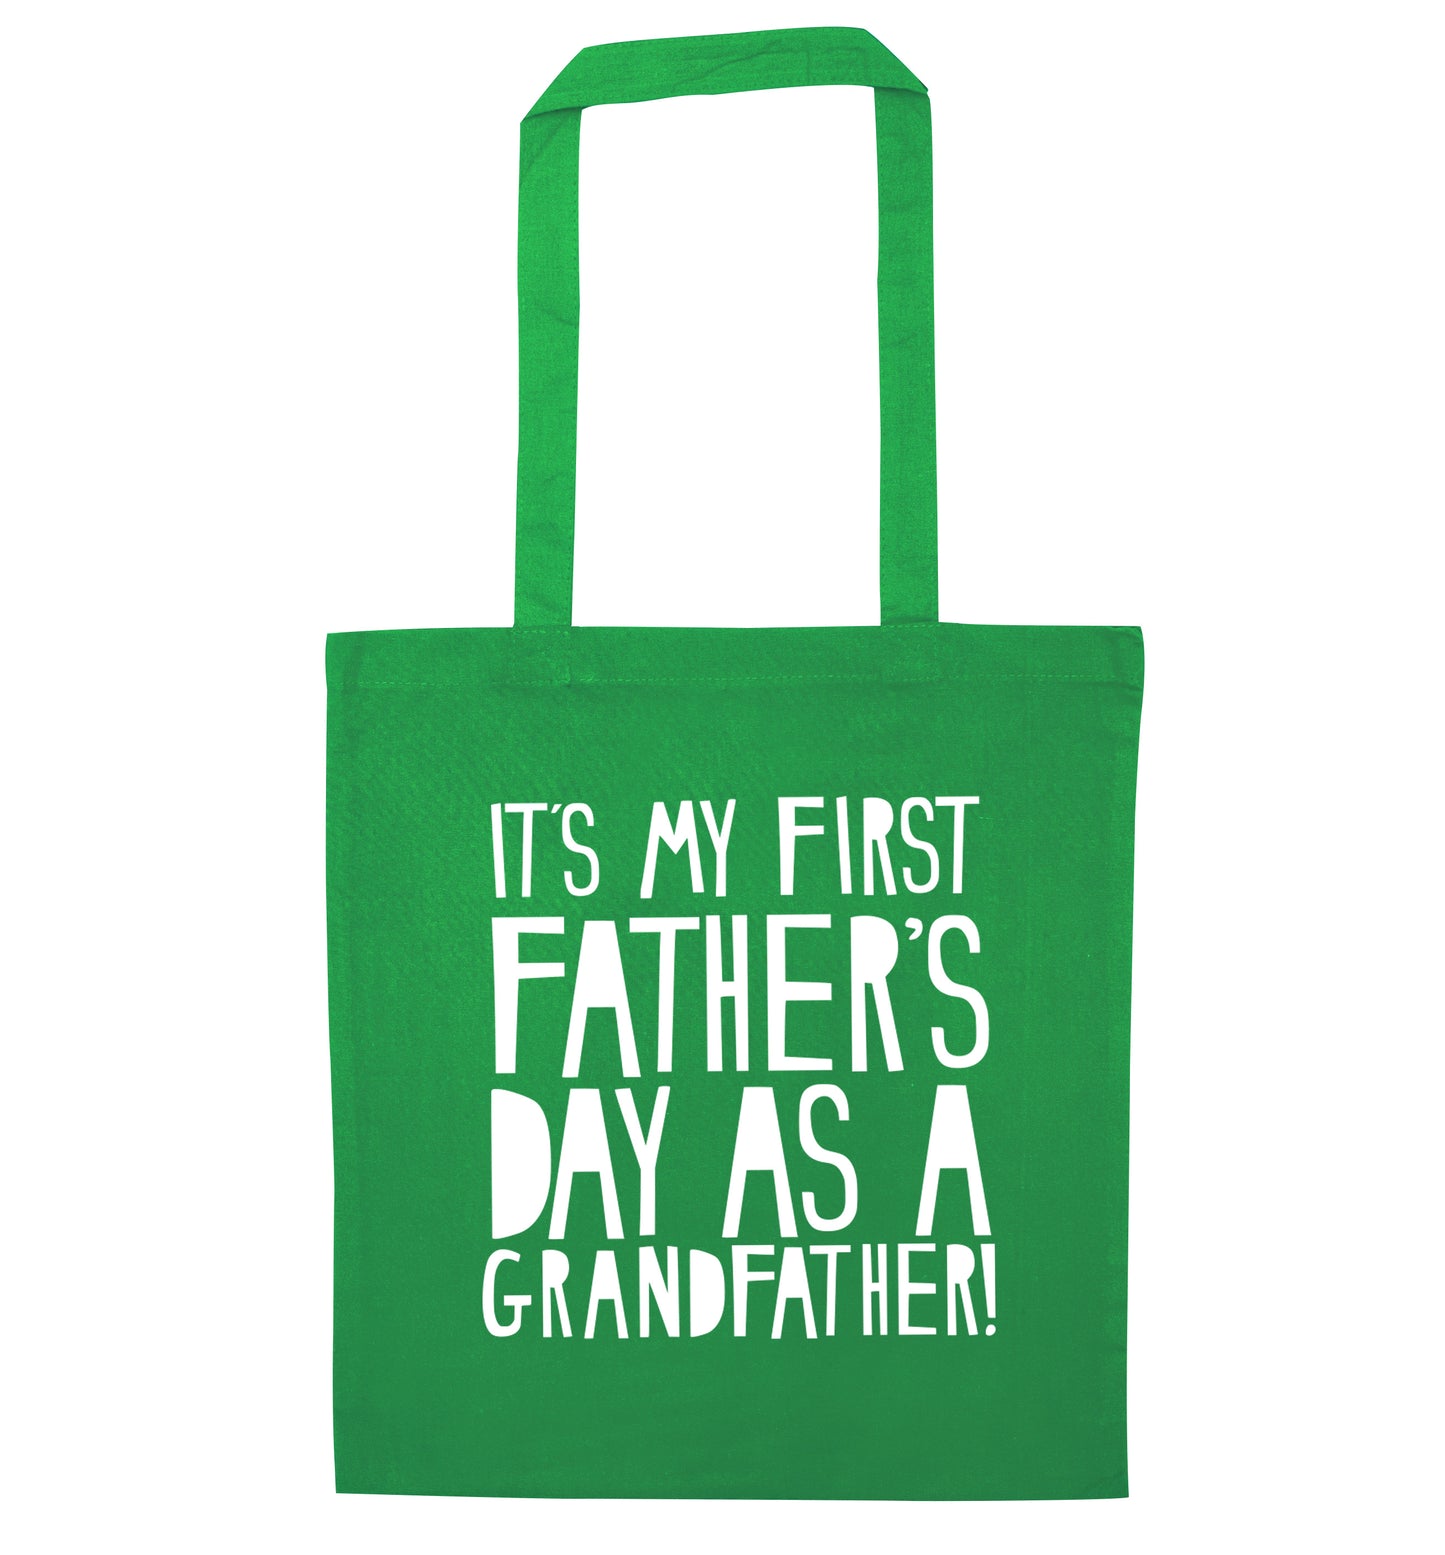 It's my first Father's Day as a Grandfather! green tote bag